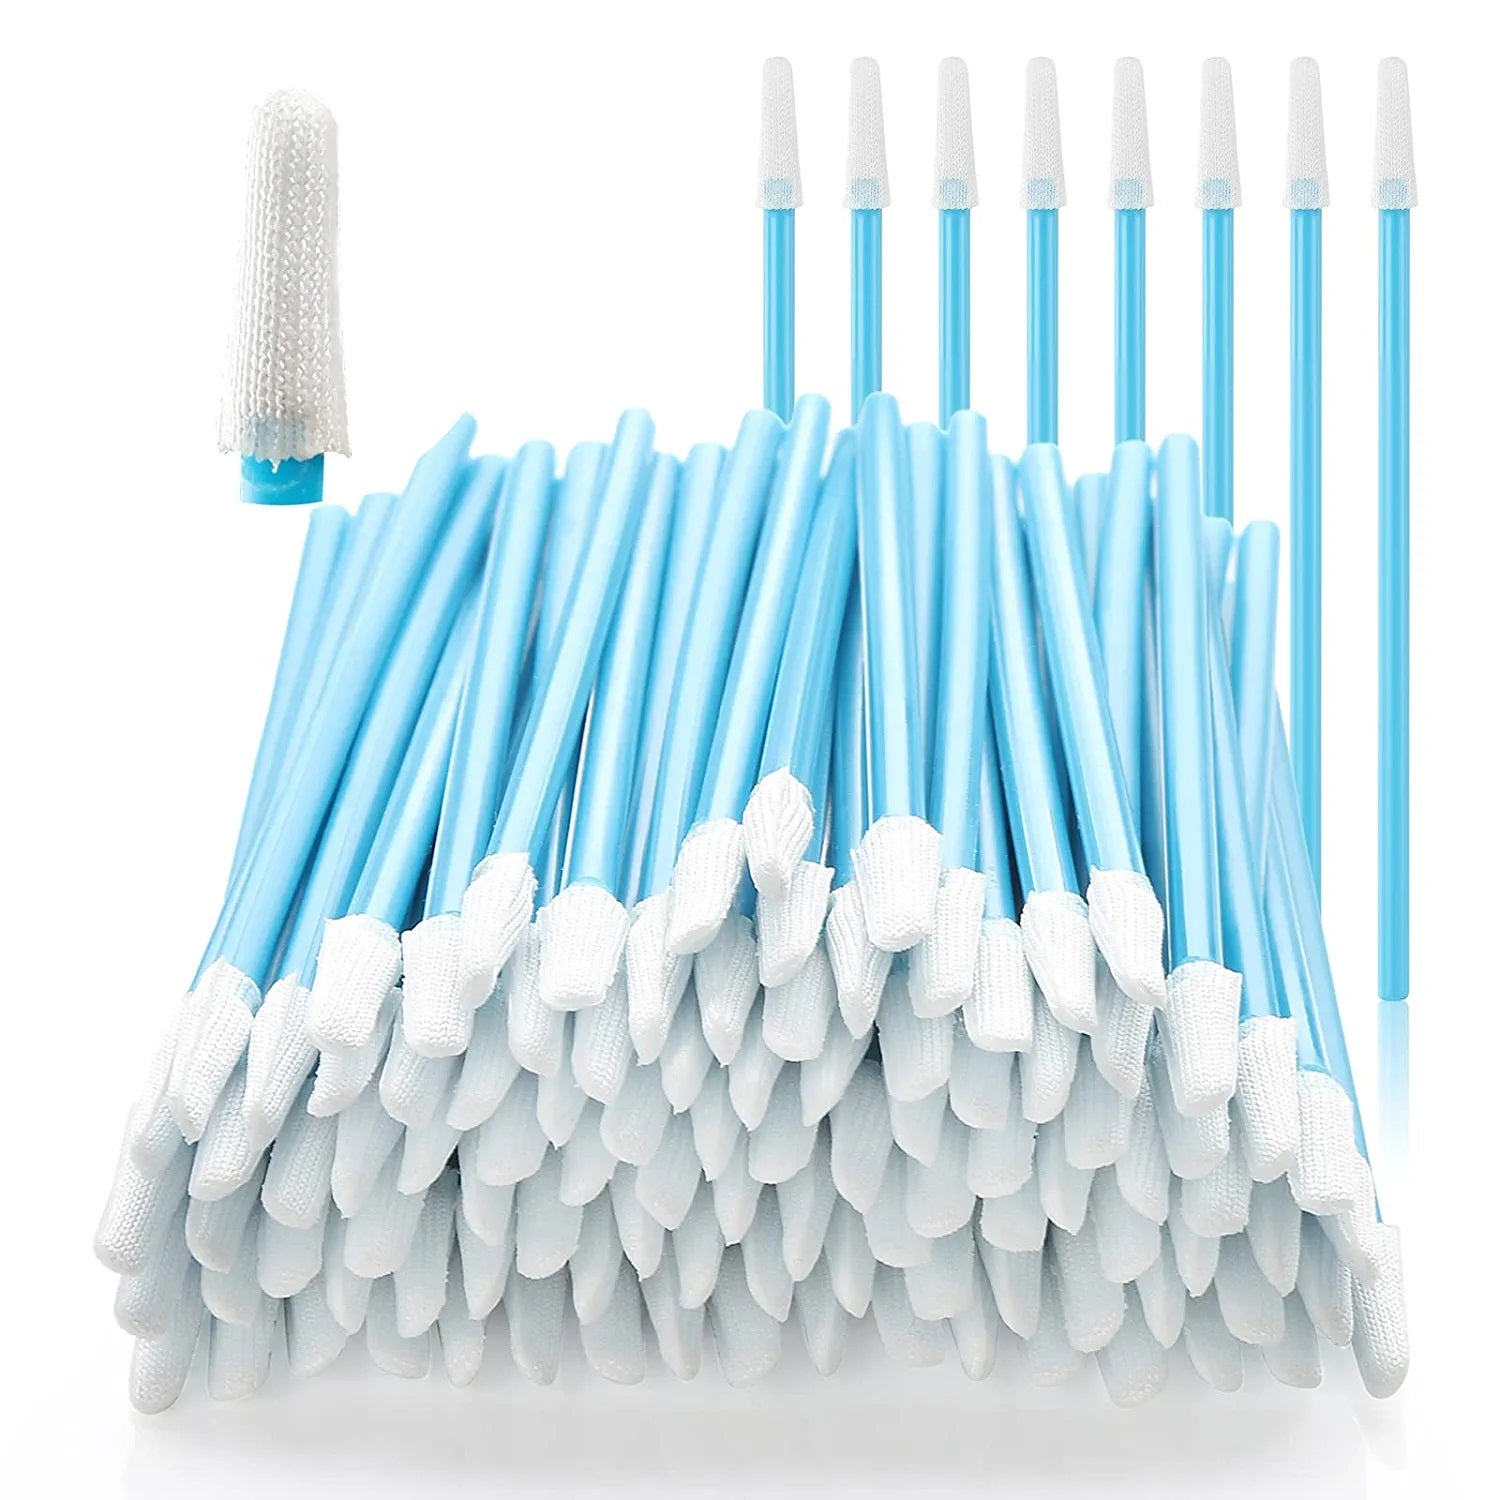 Detailing Cleaning Swab Sticks AAwipes Cleaning Kit Microfiber Knitted Polyester Swab Buds (5 Type) Lint Free Swabs for Printer, Gun, Optics Lens, Camera, Arts and Crafts, Automotive Detailing (5 Types, Total 1,000 Pcs/Pack) (No. FA501)